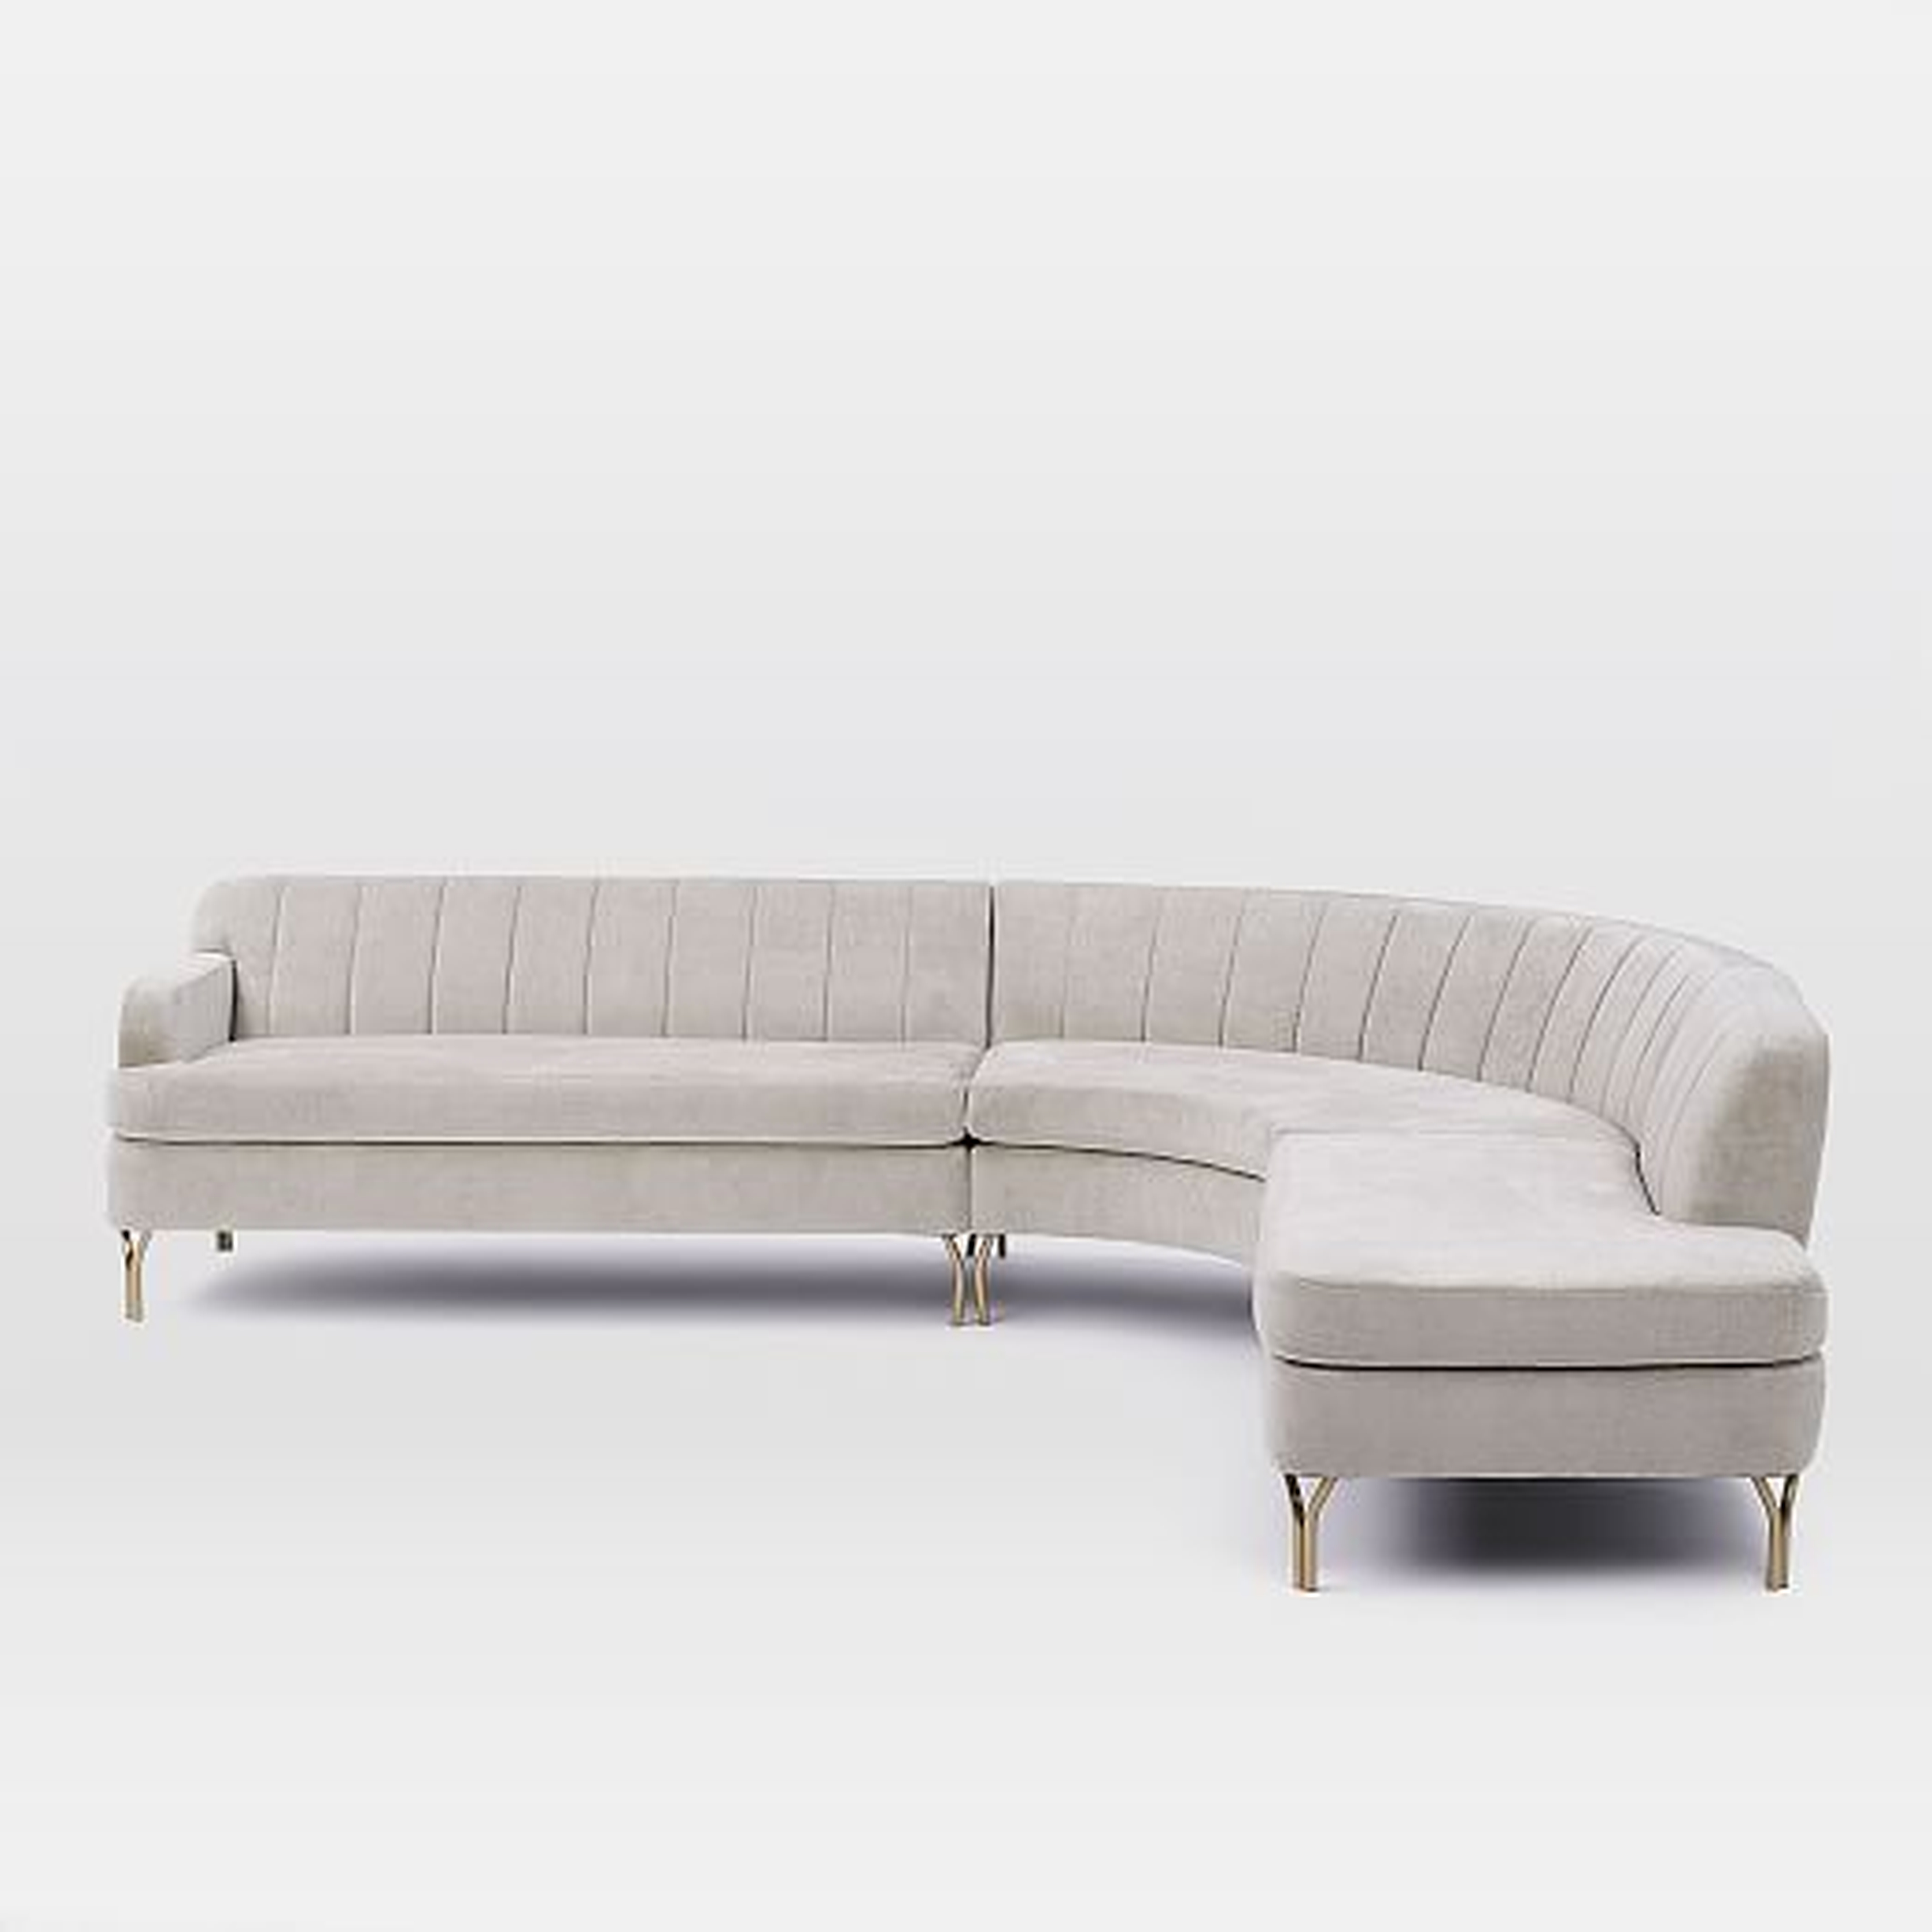 Valencia 3-Piece Terminal Chaise Sectional - LEFT SOFA, ROUND CORNER, RIGHT TERMINAL CHAISE - West Elm